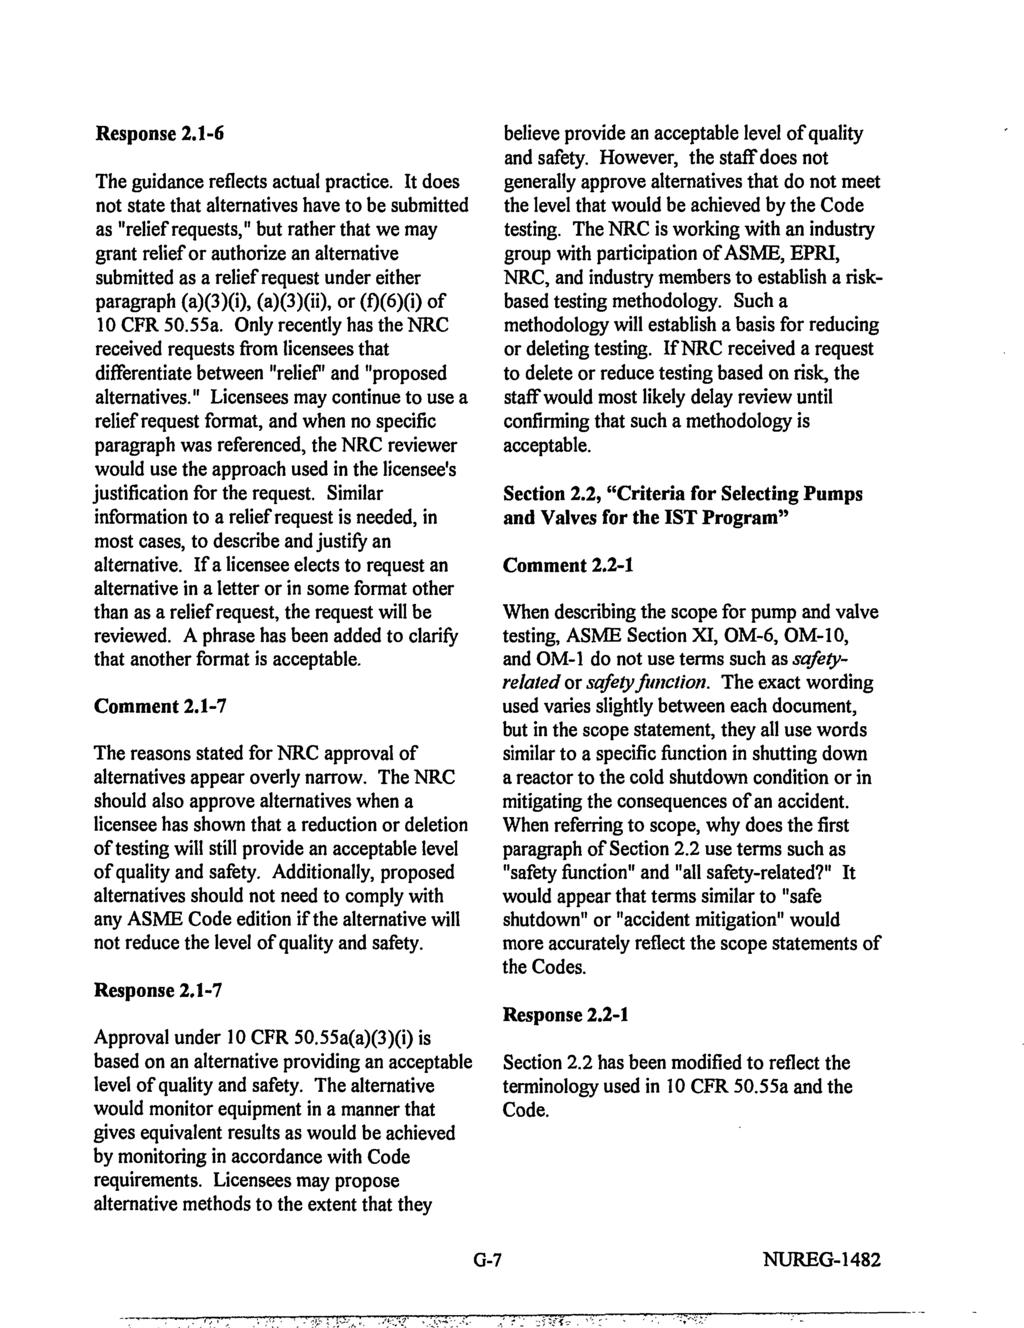 Response 2.1-6 The guidance reflects actual practice.